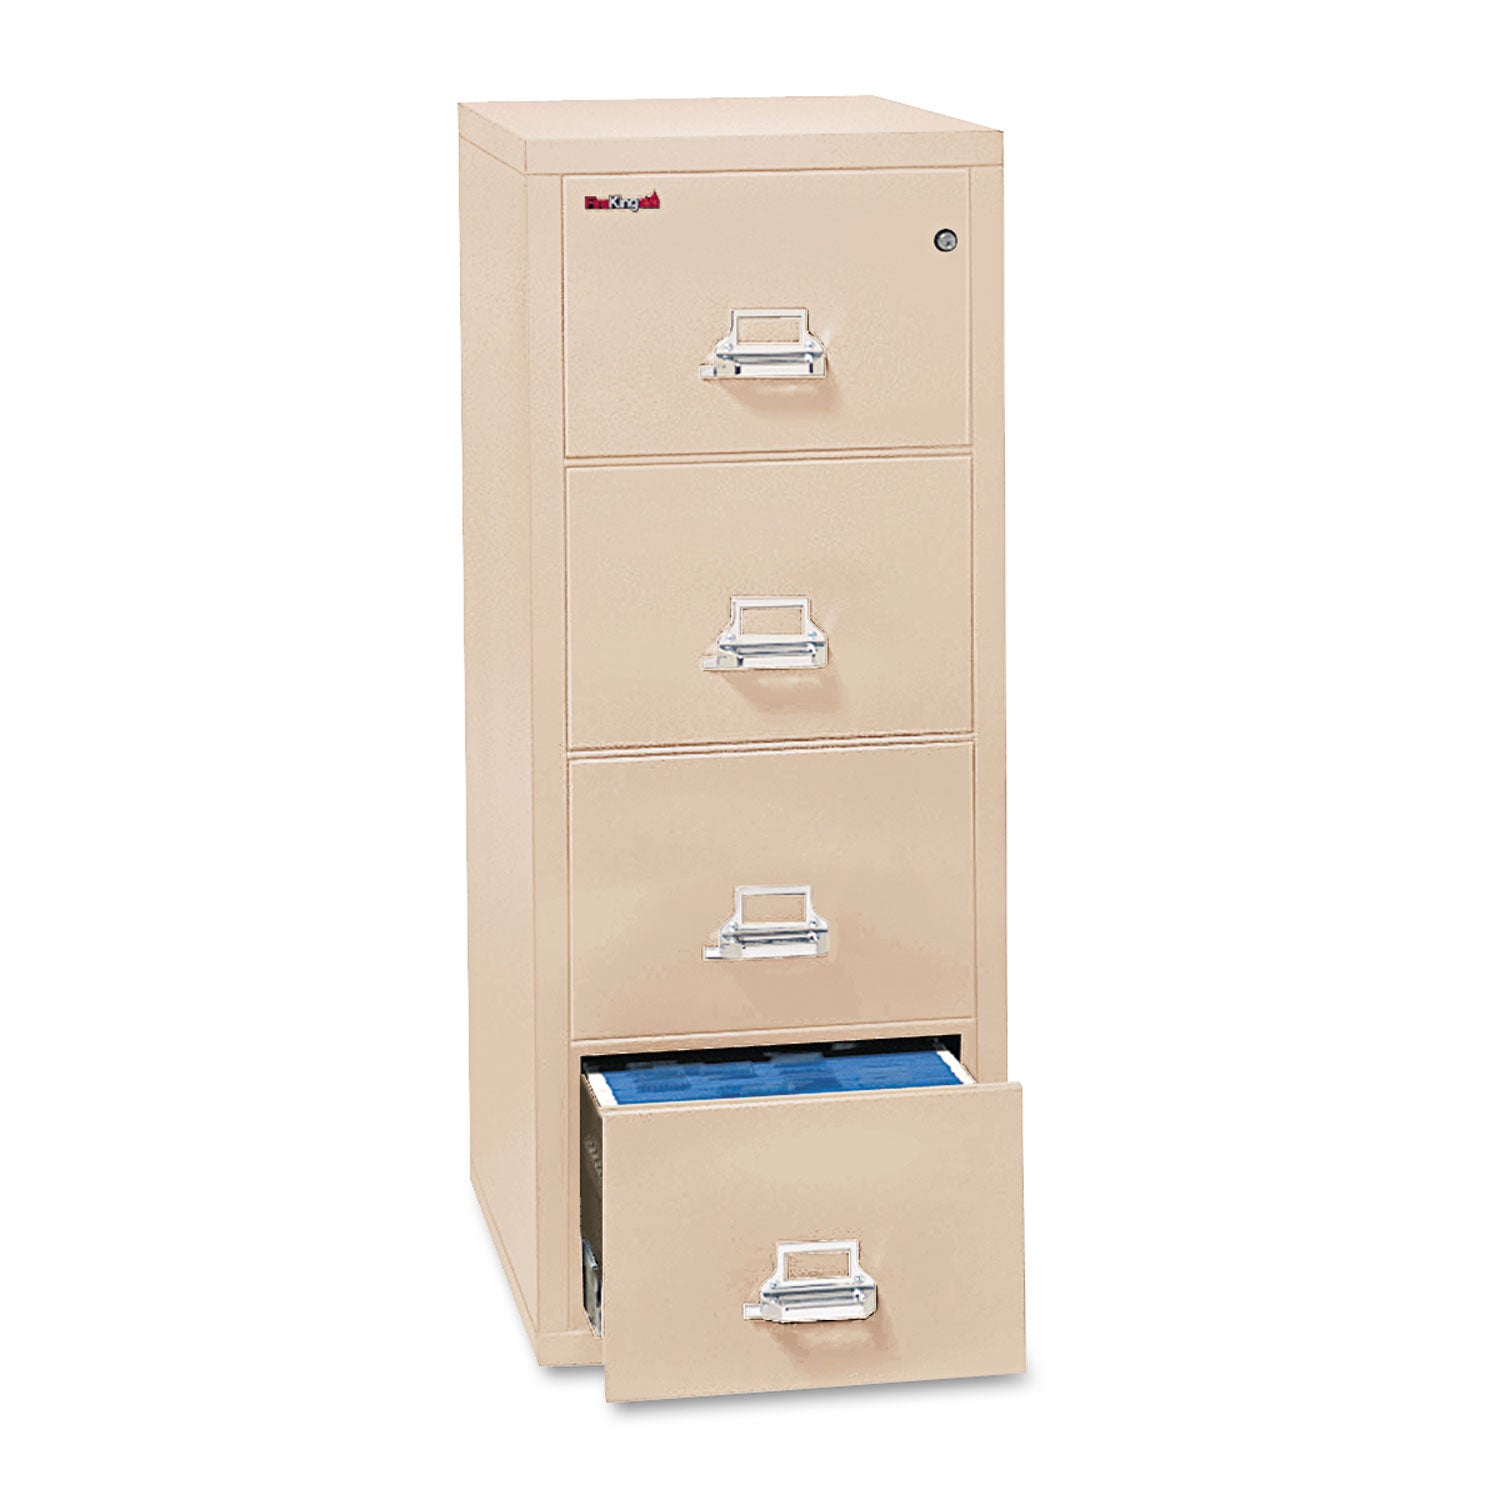 Insulated Vertical File, 1-Hour Fire Protection, 4 Legal-Size File Drawers, Parchment, 20.81" x 31.56" x 52.75 - 